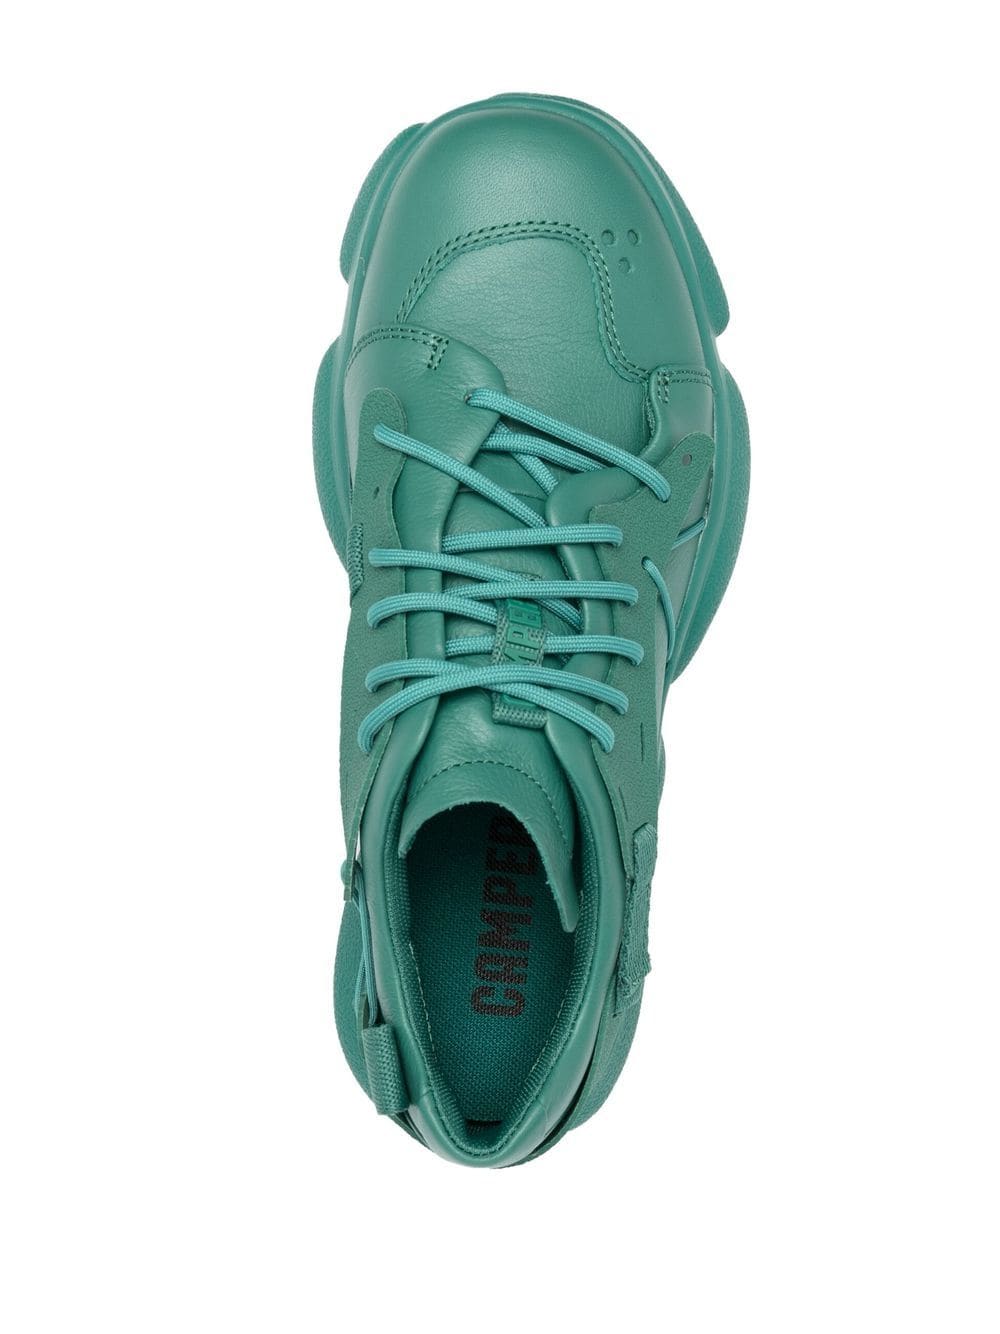 Karst Green Sneakers for Women - Autumn/Winter collection - Camper USA